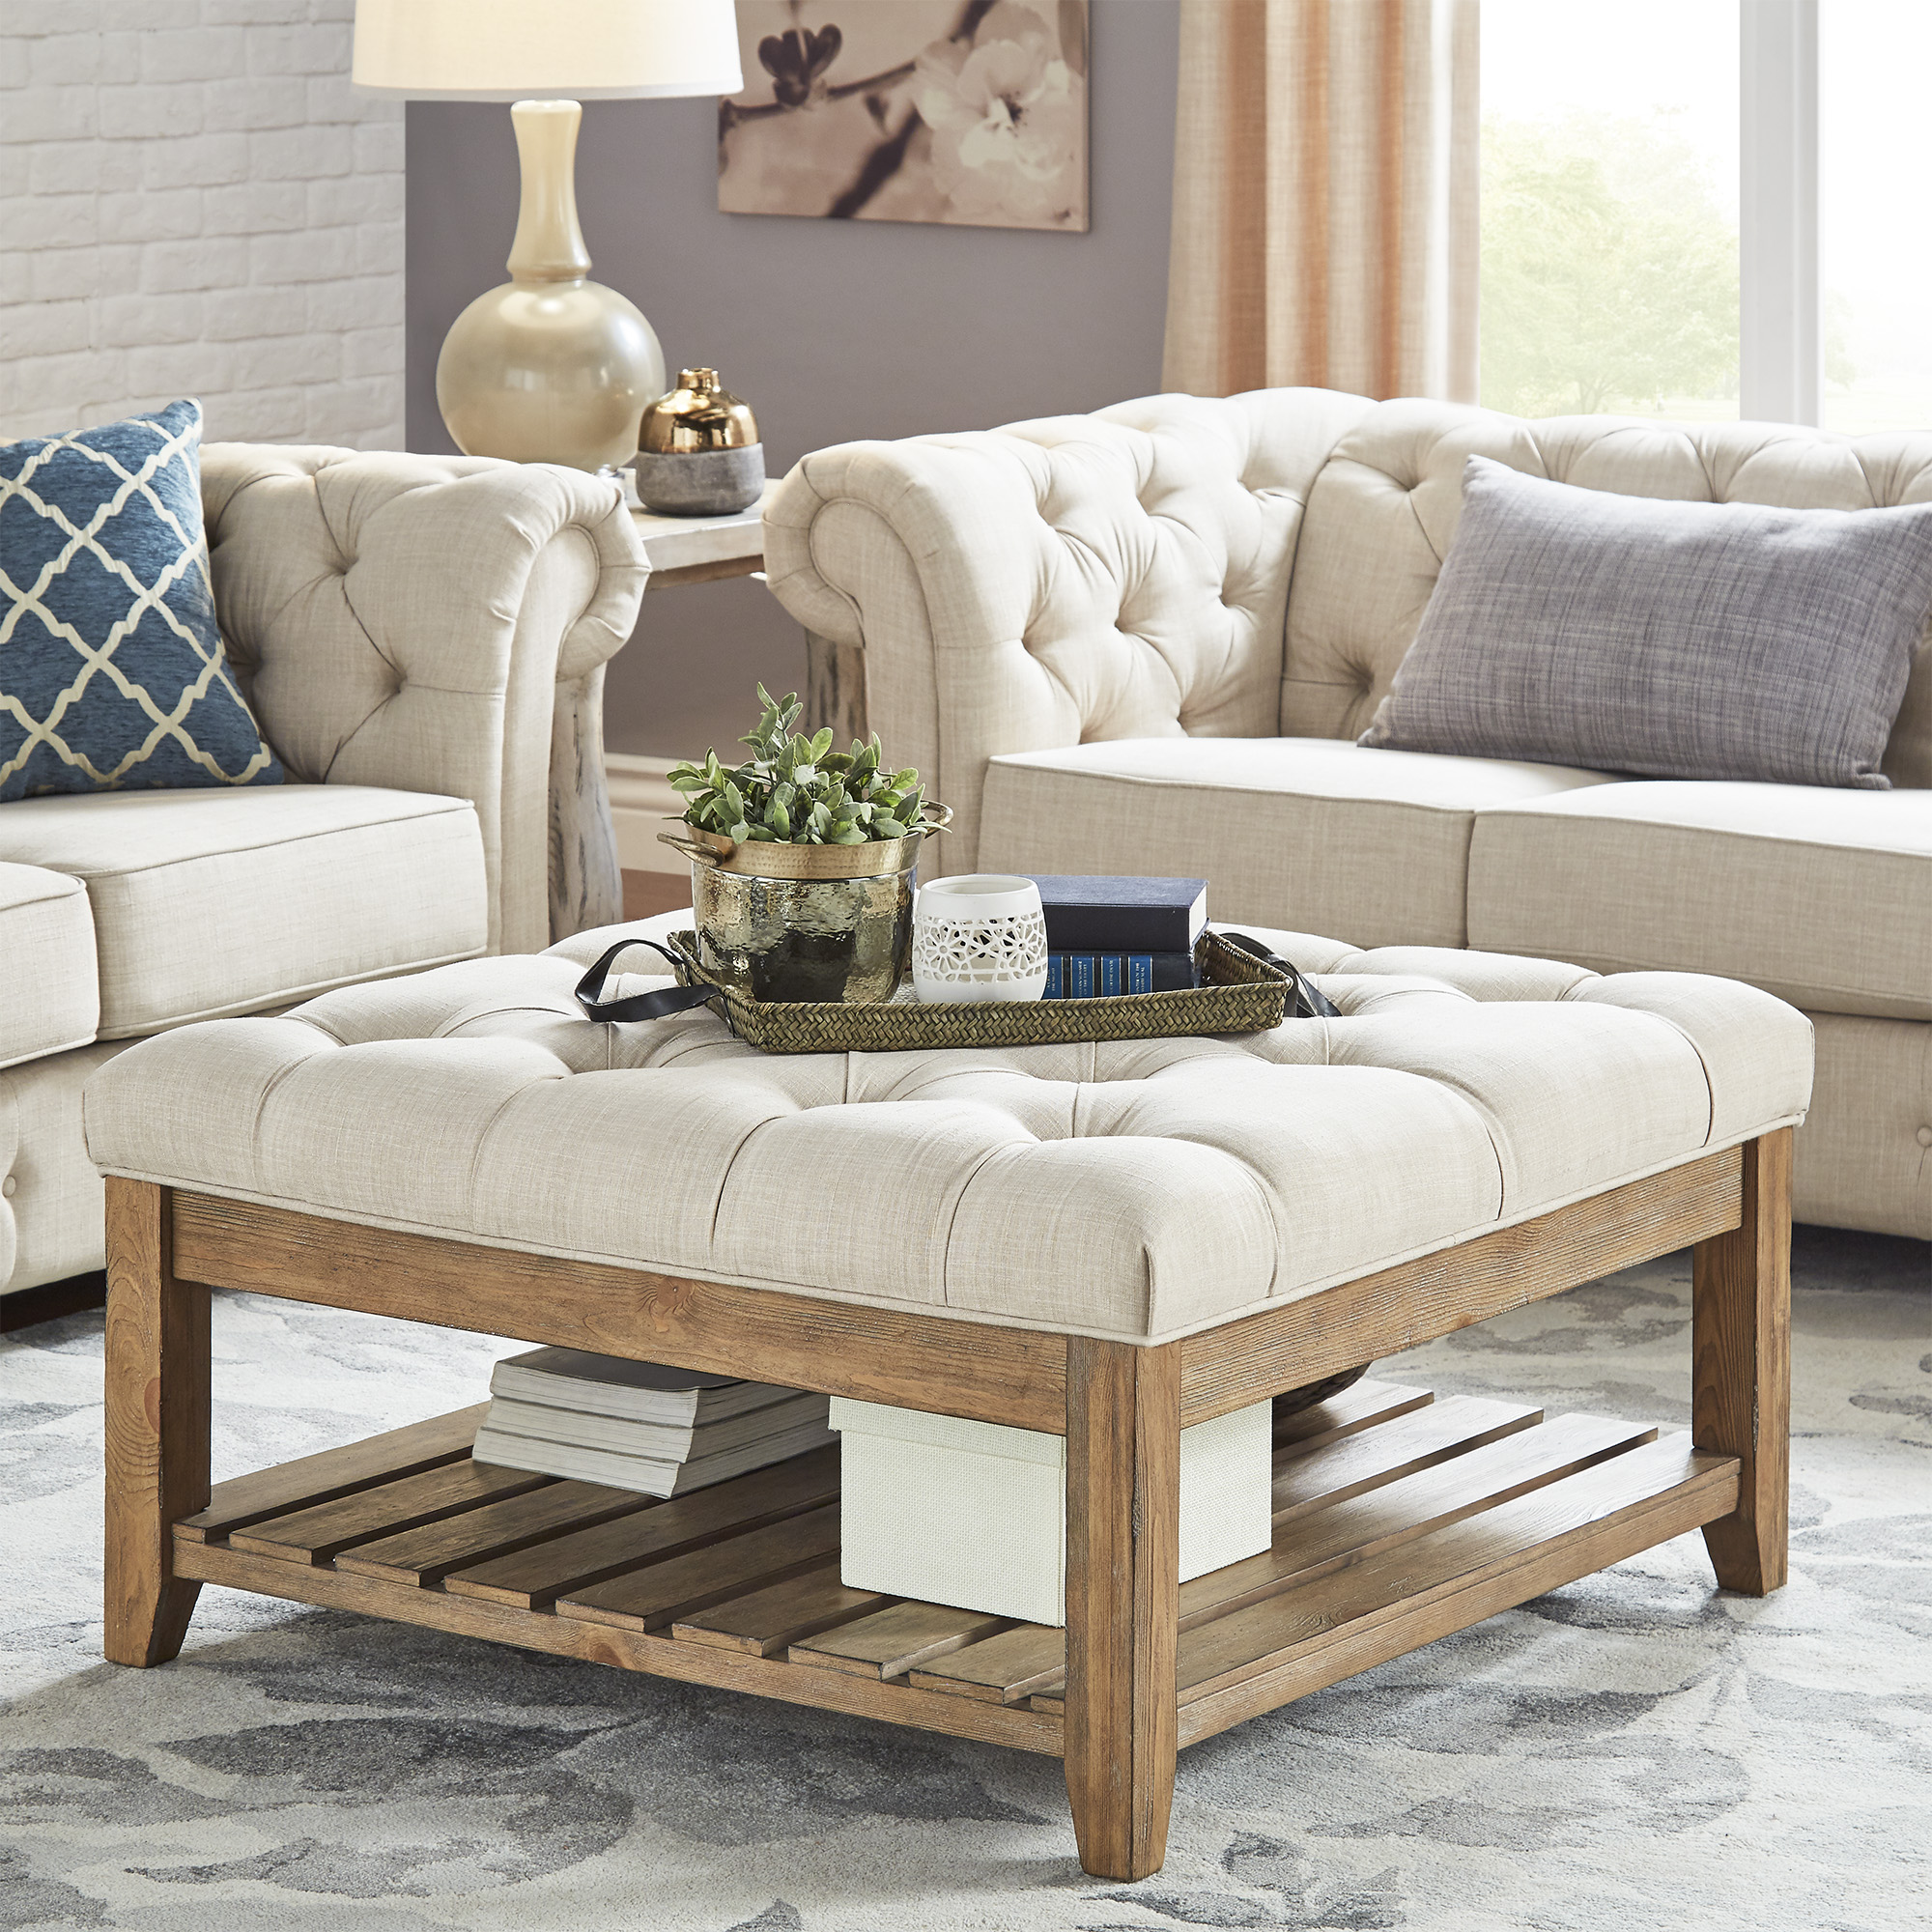 Pine Planked Storage Ottoman Coffee Table